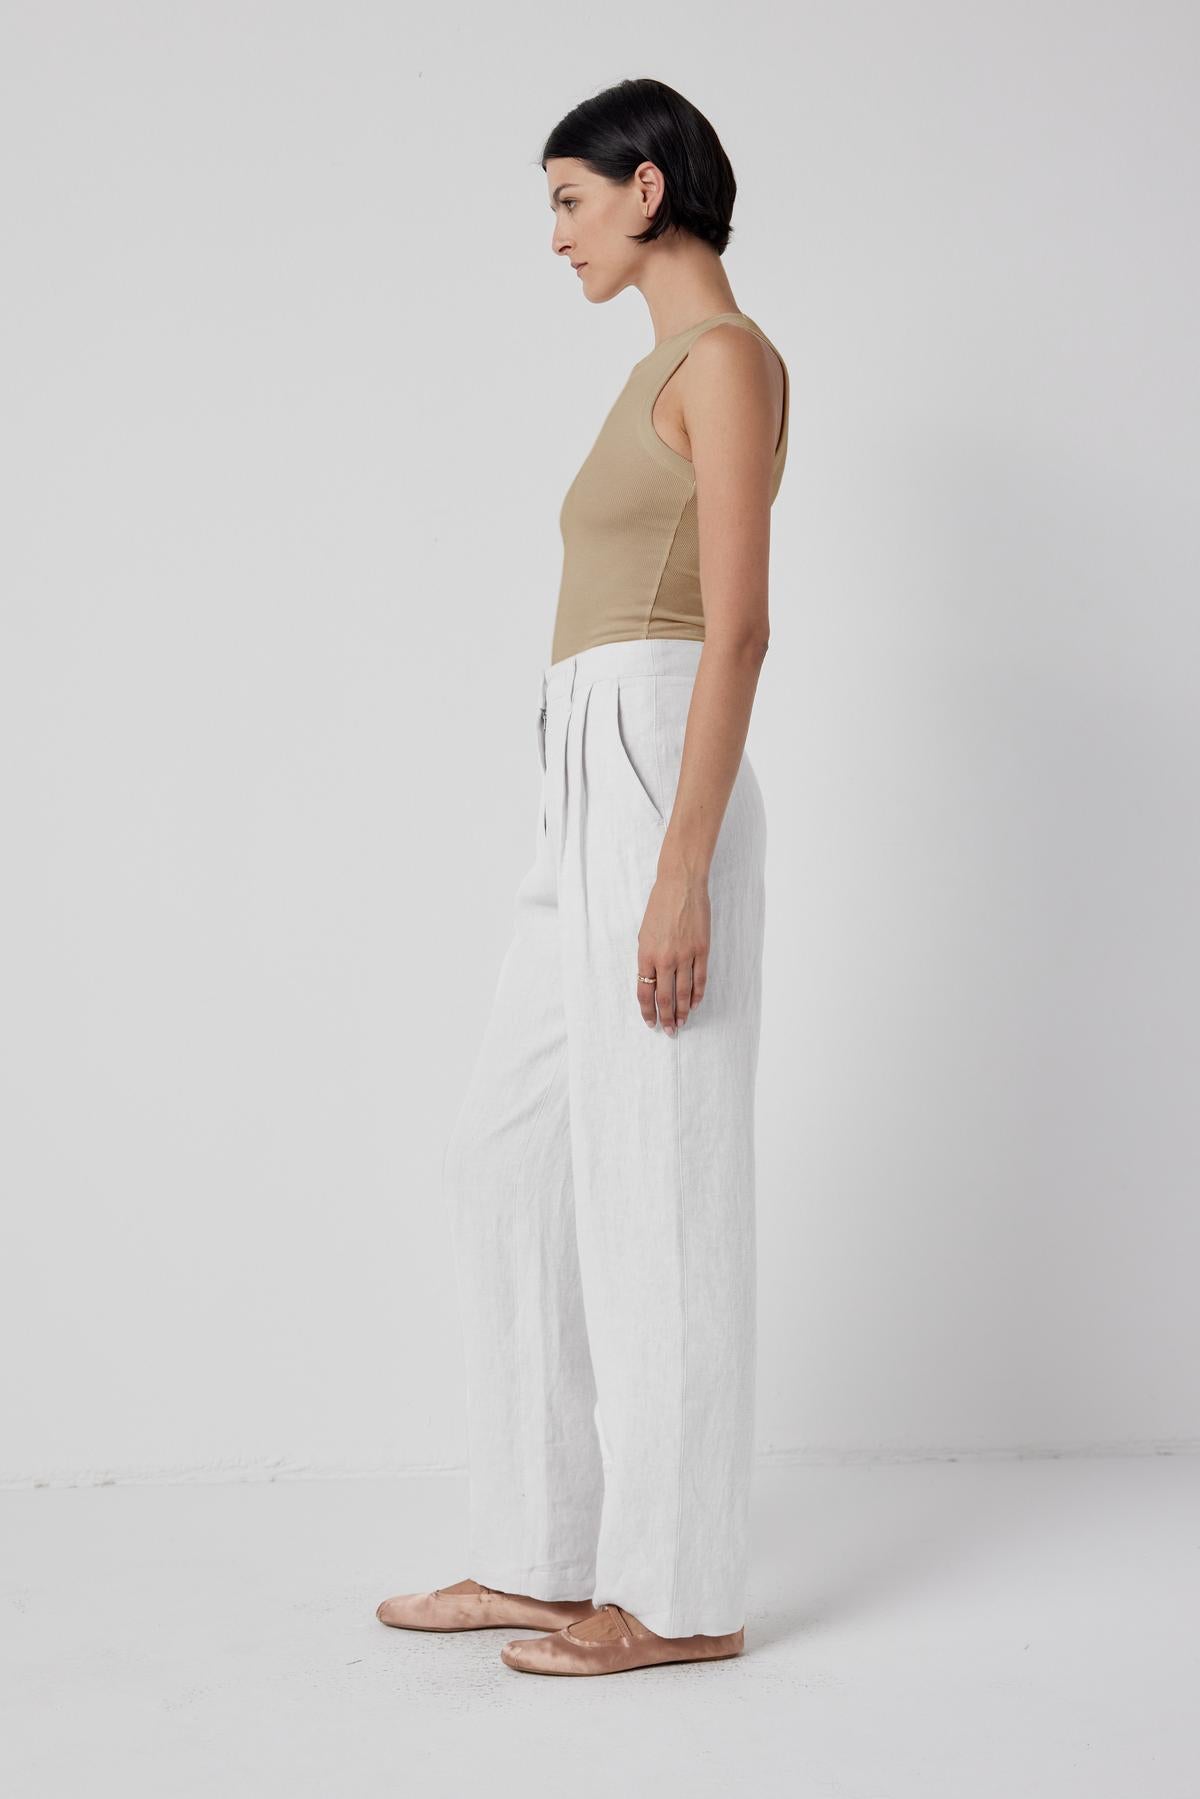   Woman standing in profile wearing a chic beige Velvet by Jenny Graham Cruz tank top and white stretch fit trousers against a white background. 